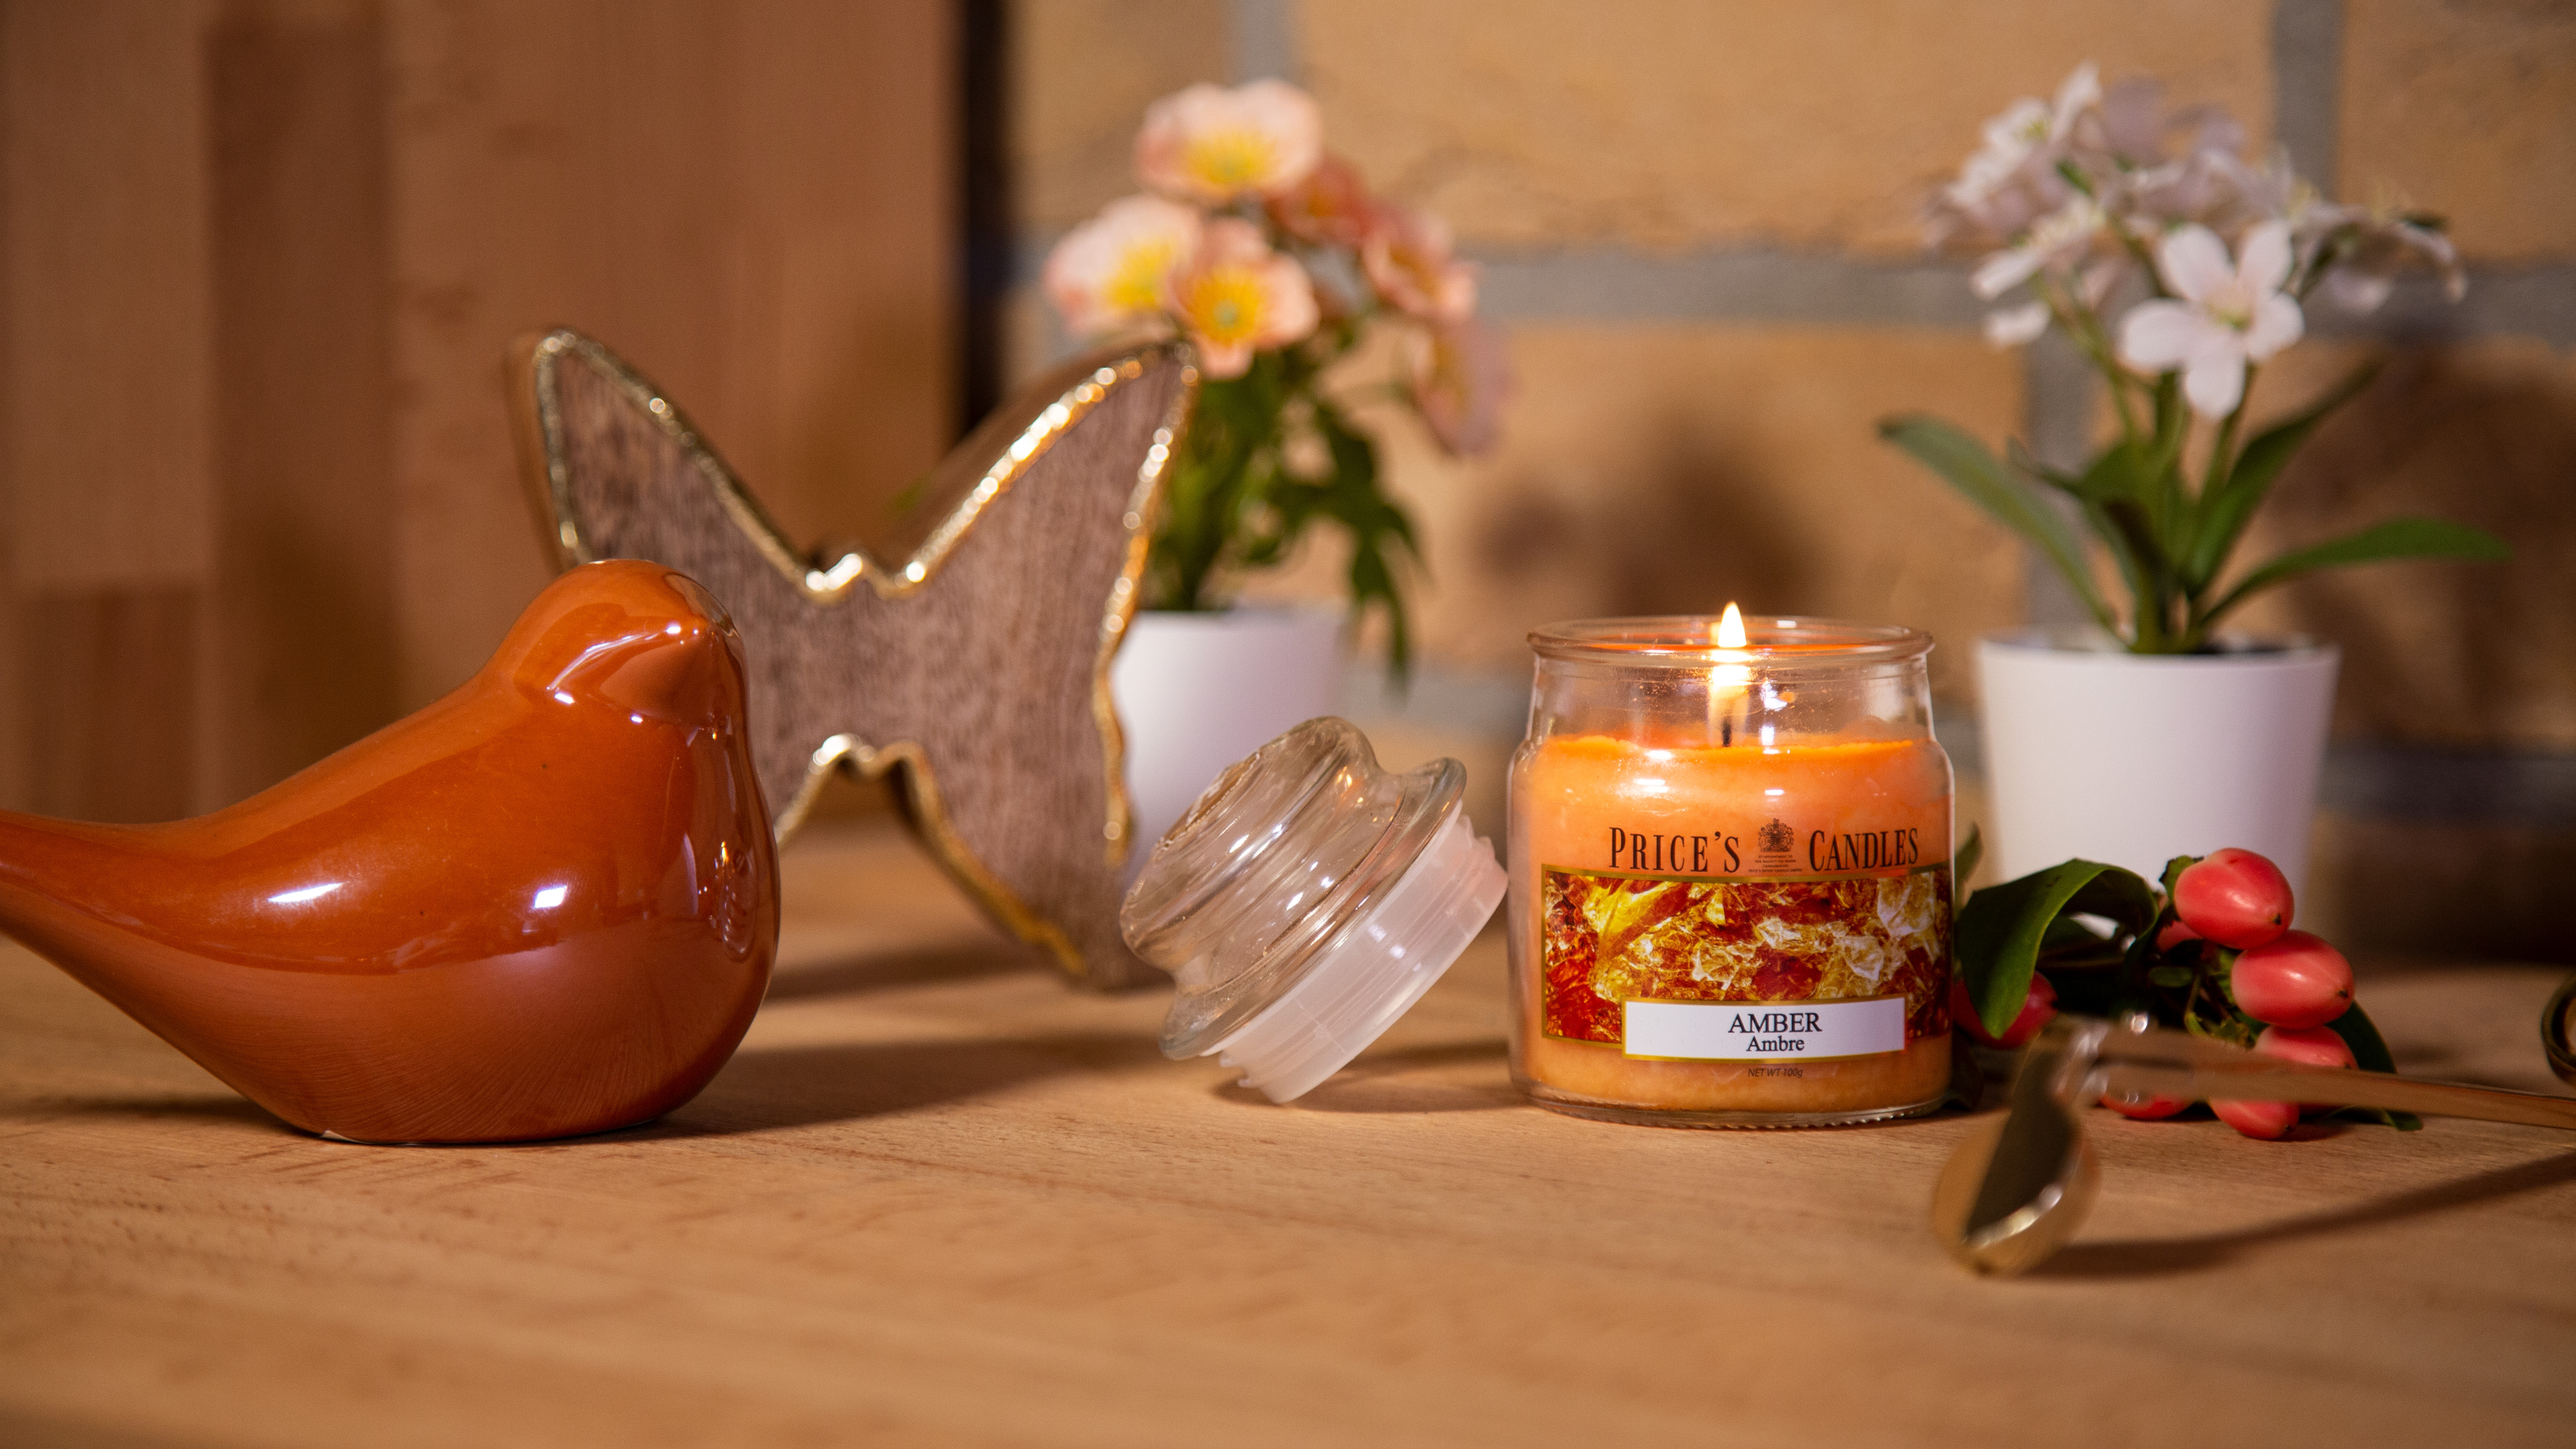 Prices Candle "Amber" 100g 